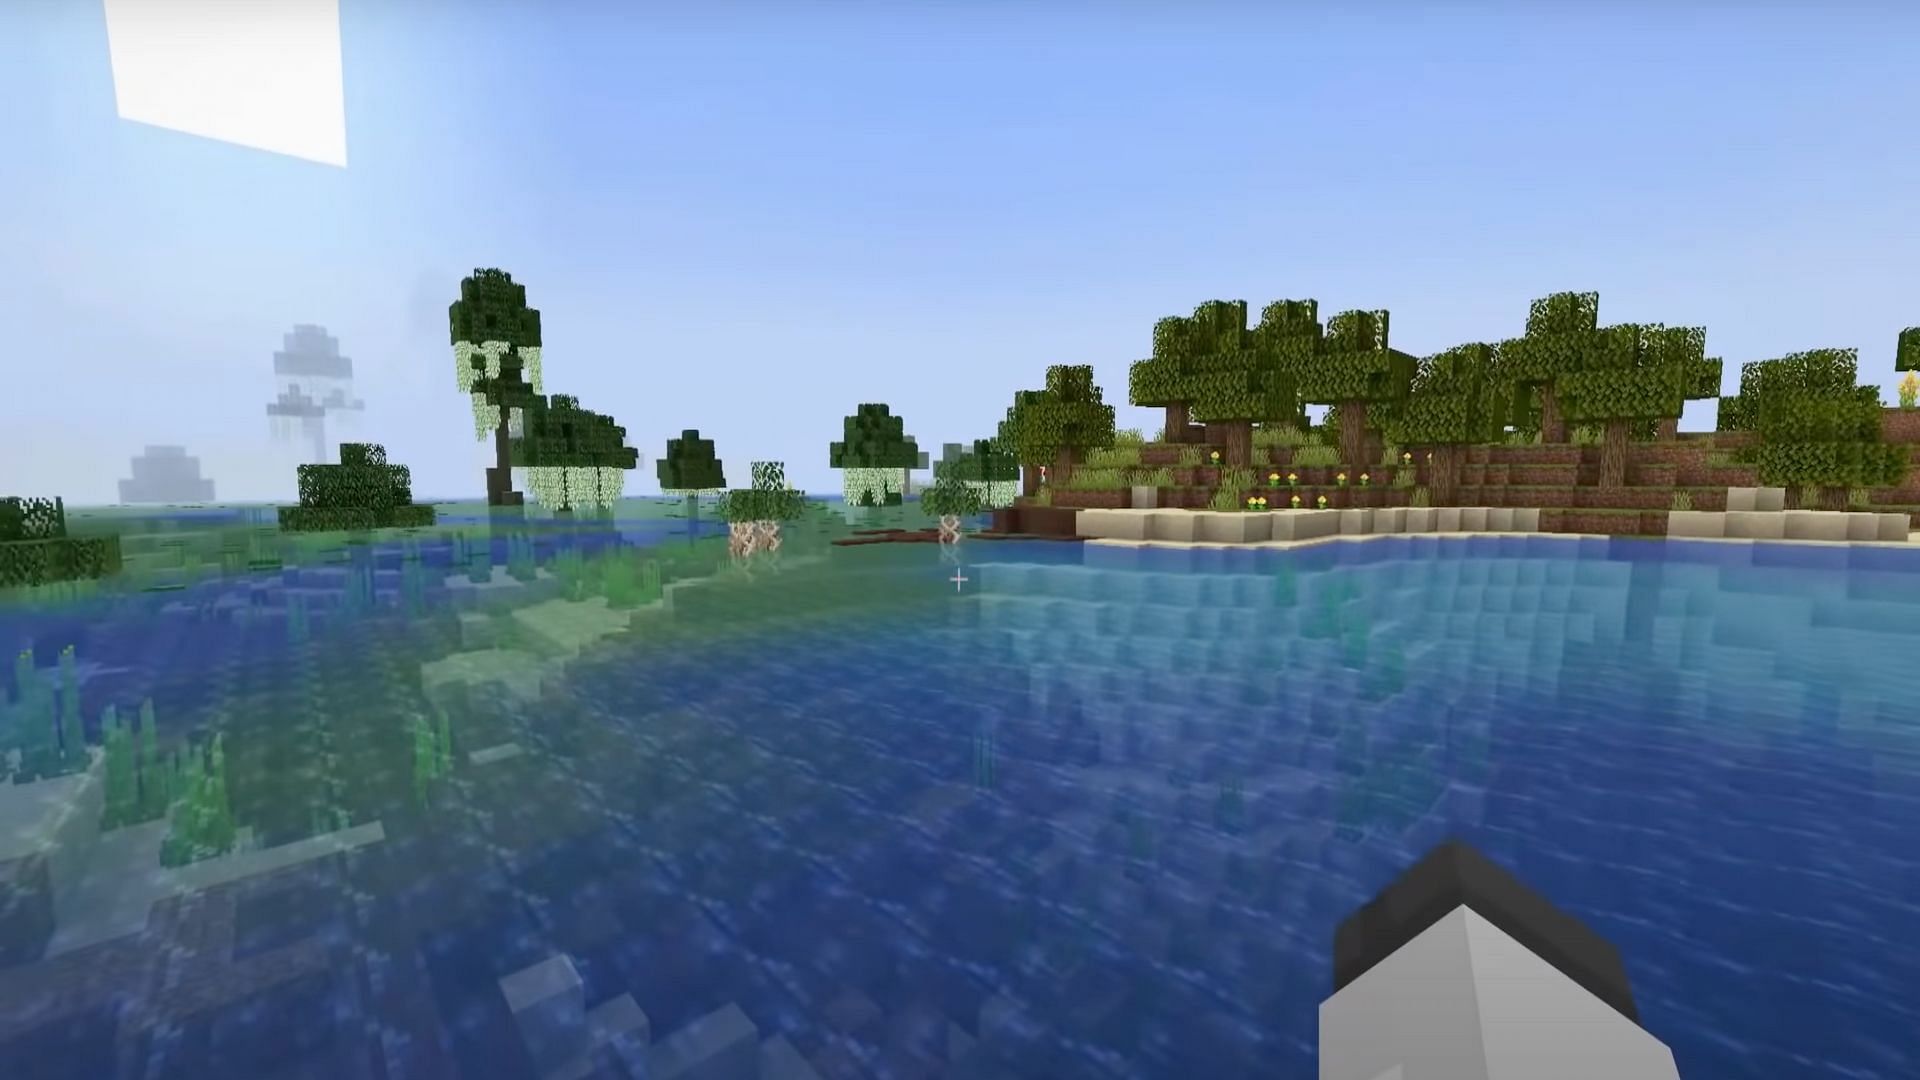 Minecraft players can install many mods that can drastically change the game (Image via yorkmouseModz/YouTube)